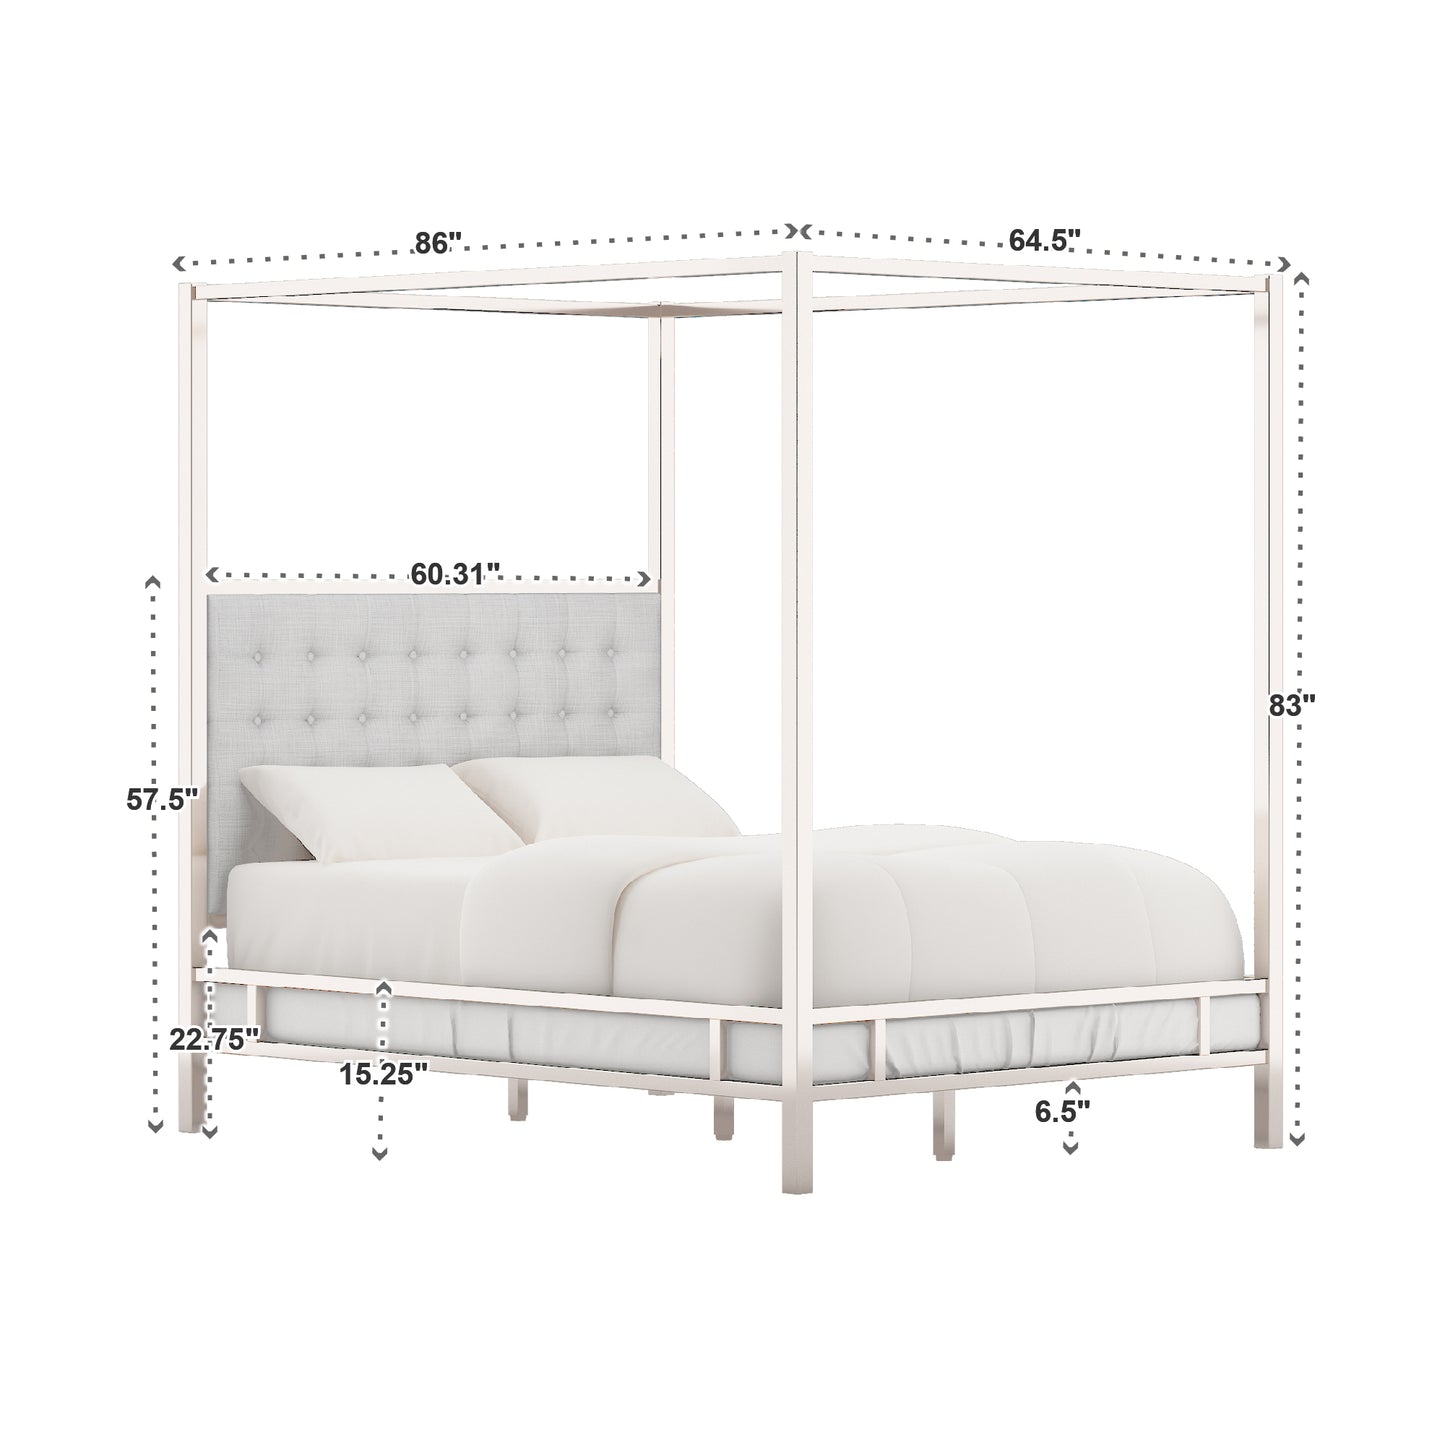 Metal Canopy Bed with Upholstered Headboard - Off-White Linen, Chrome Finish, Queen Size